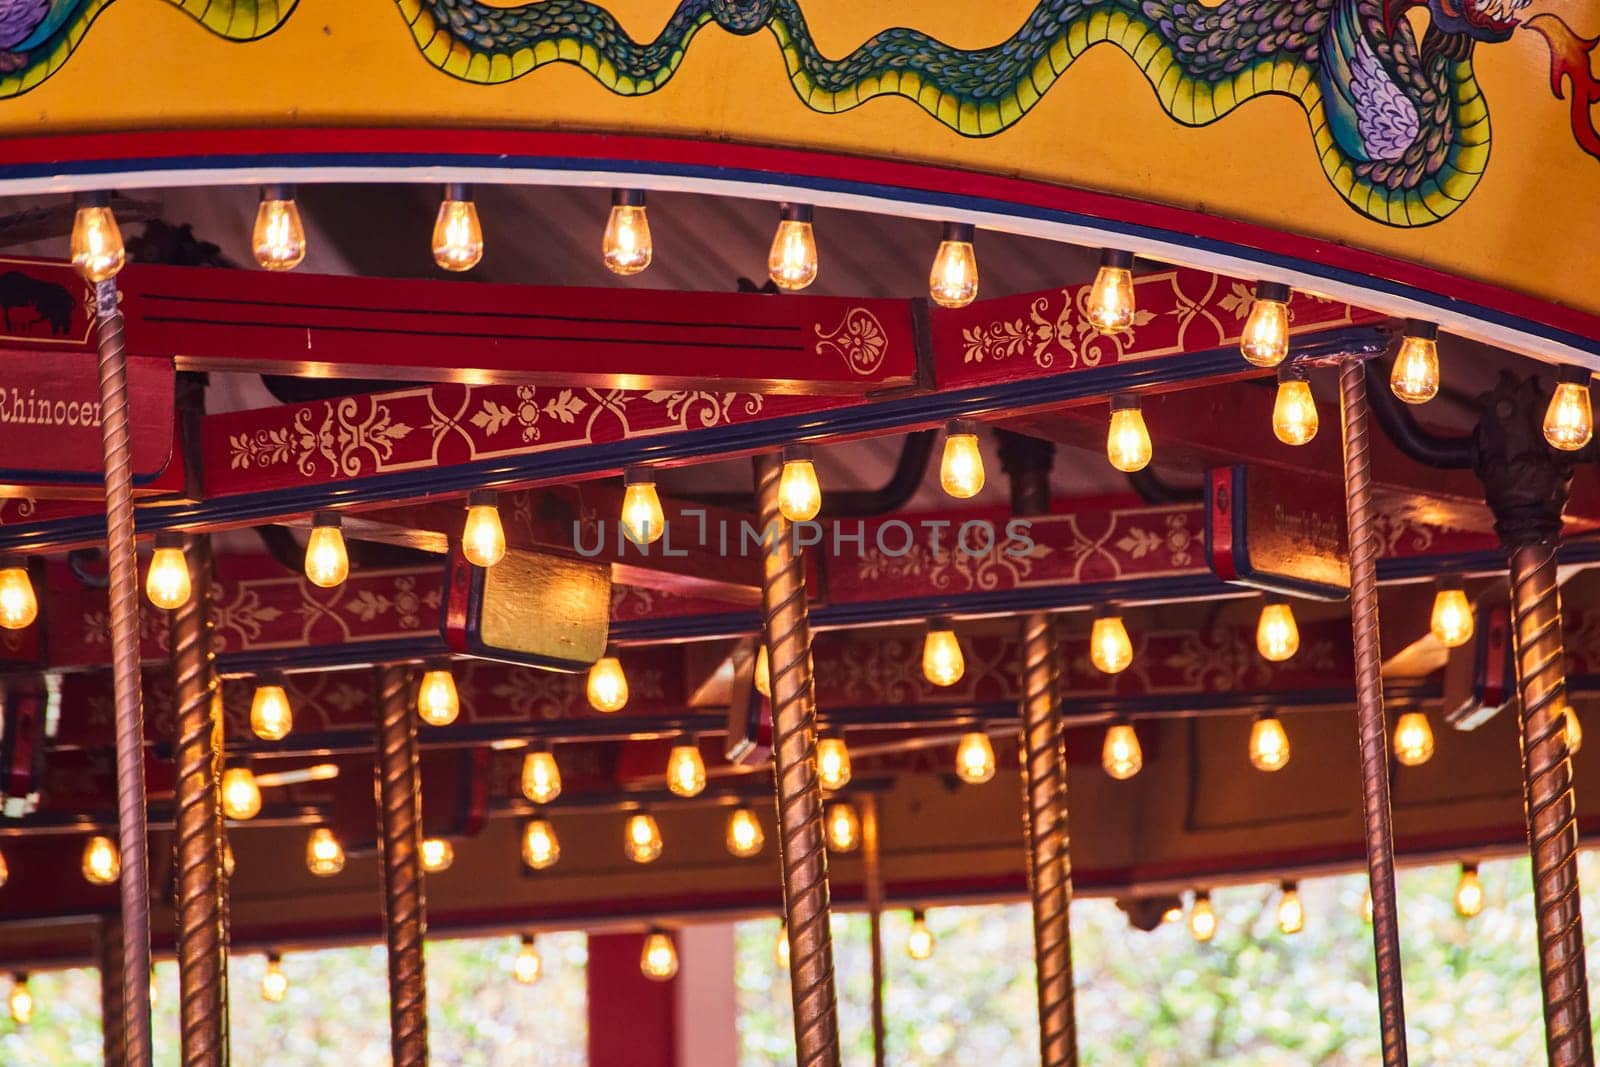 Enchanting carousel at Fort Wayne Children's Zoo, Indiana, showcasing ornate lights and mythical decor.